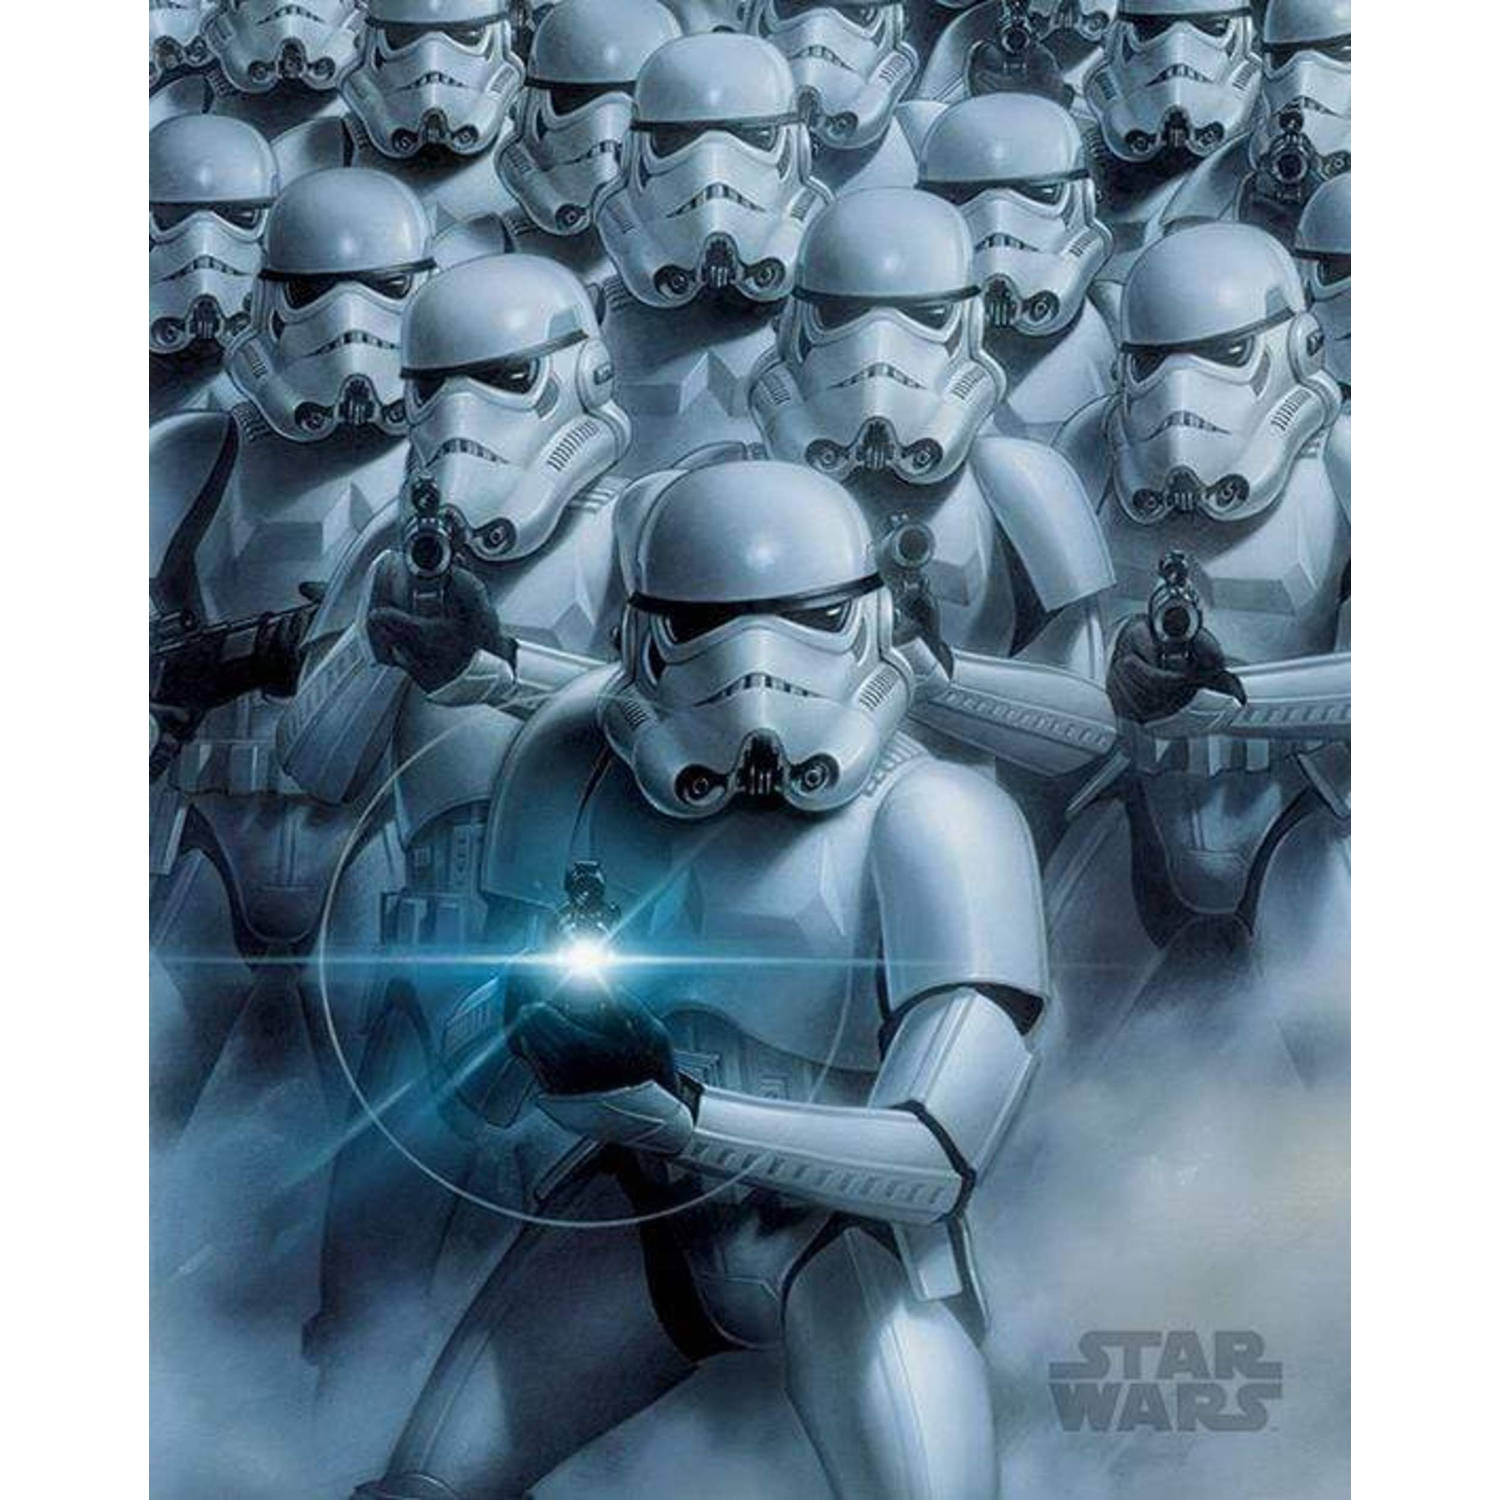 Star Wars Rebels Stormtroopers 16 x 20 Inches Mini Poster